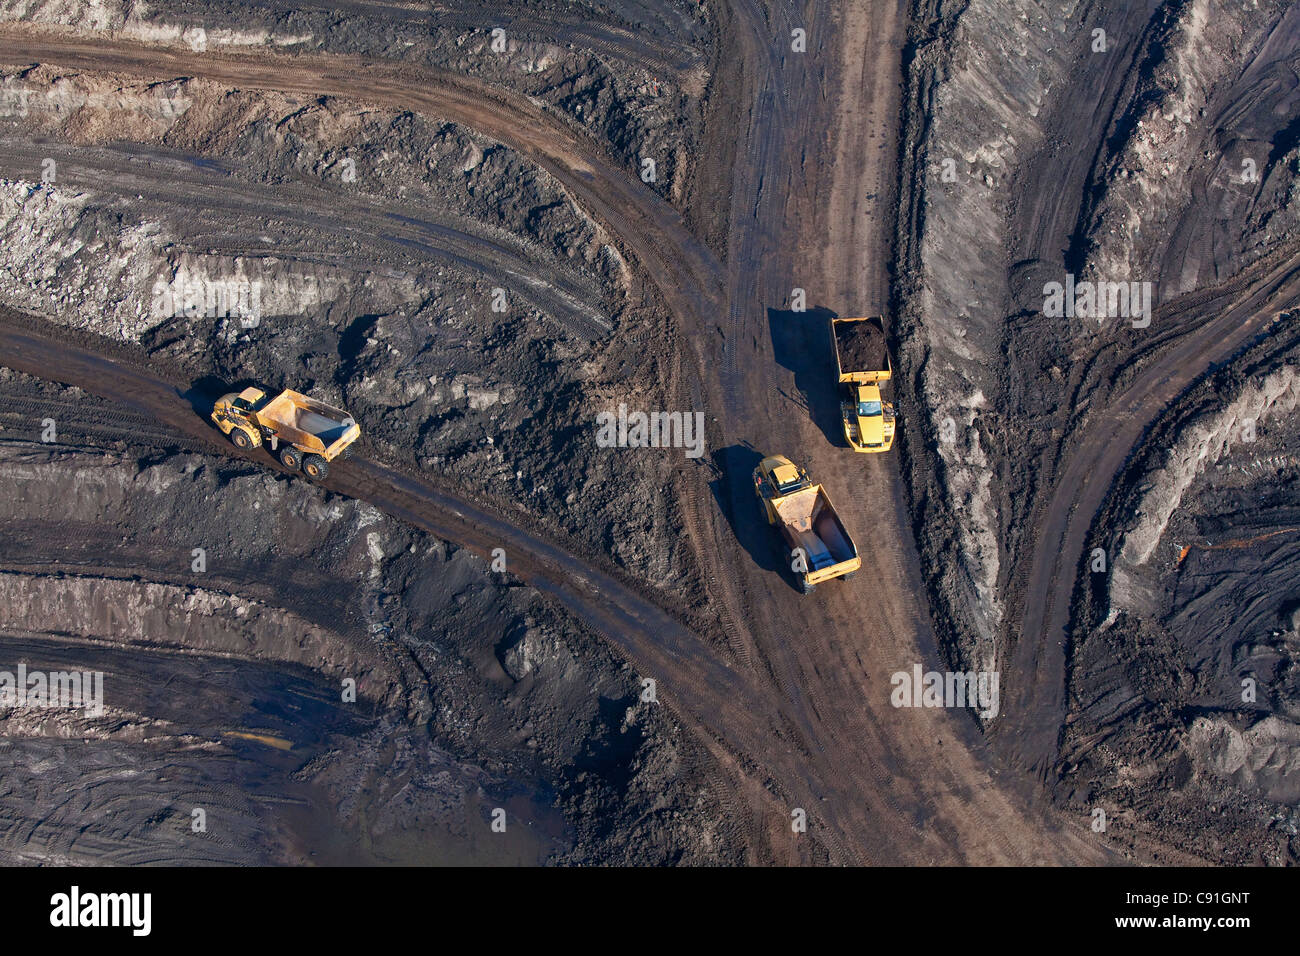 Aerial view of an open-pit lignite mine, Lorries transporting brown coal, Schoeningen, Lower Saxony, Germany Stock Photo